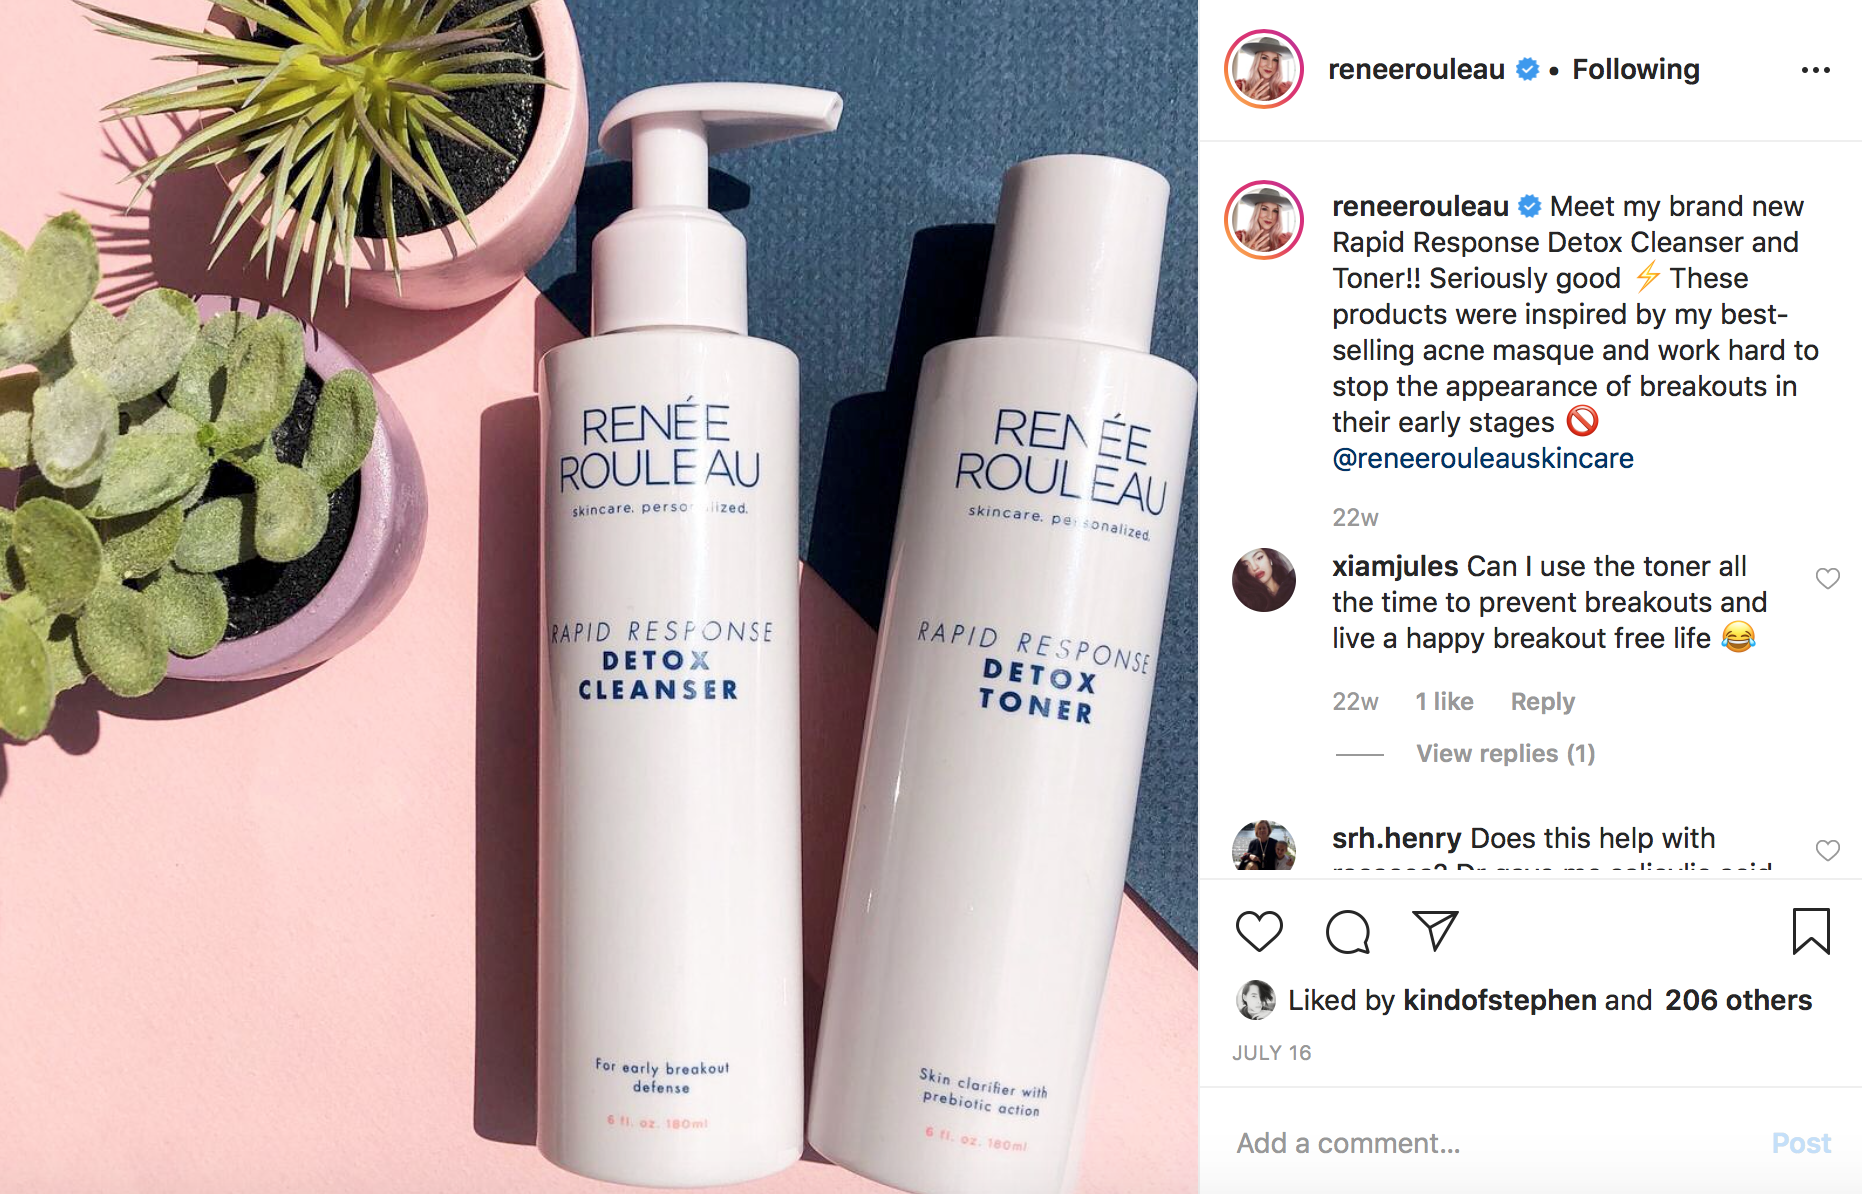 A photo of the Detox Cleanser and Toner from Renee Rouleau taken from her instagram